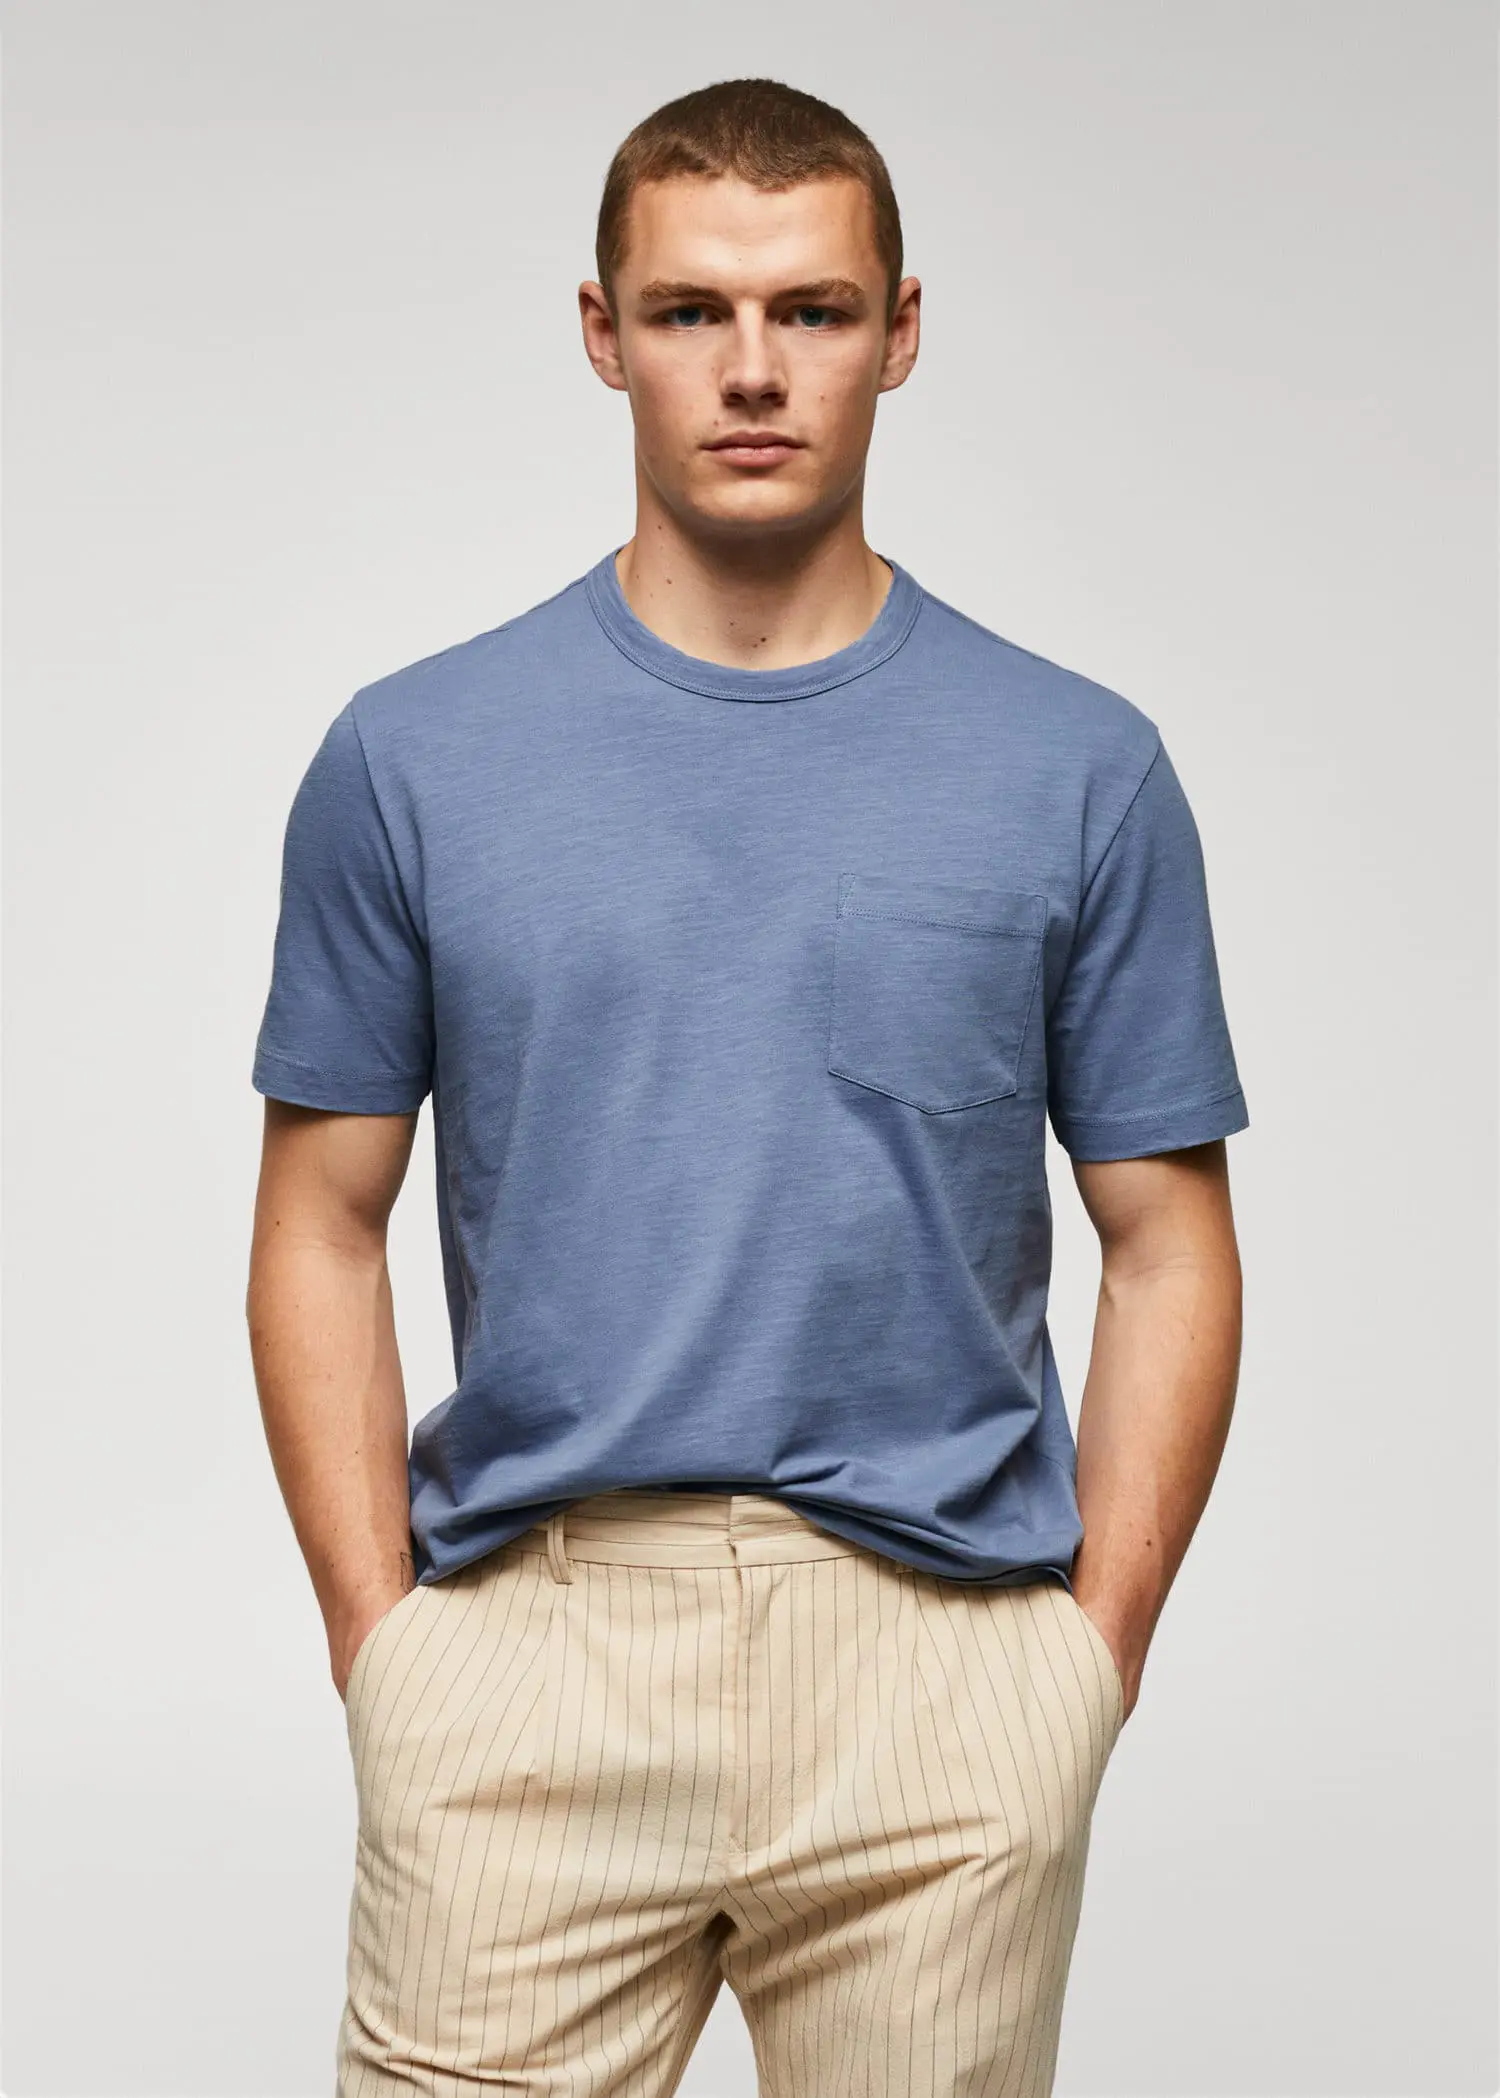 Mango 100% cotton t-shirt with pocket. a man in a blue t-shirt is posing for a picture. 